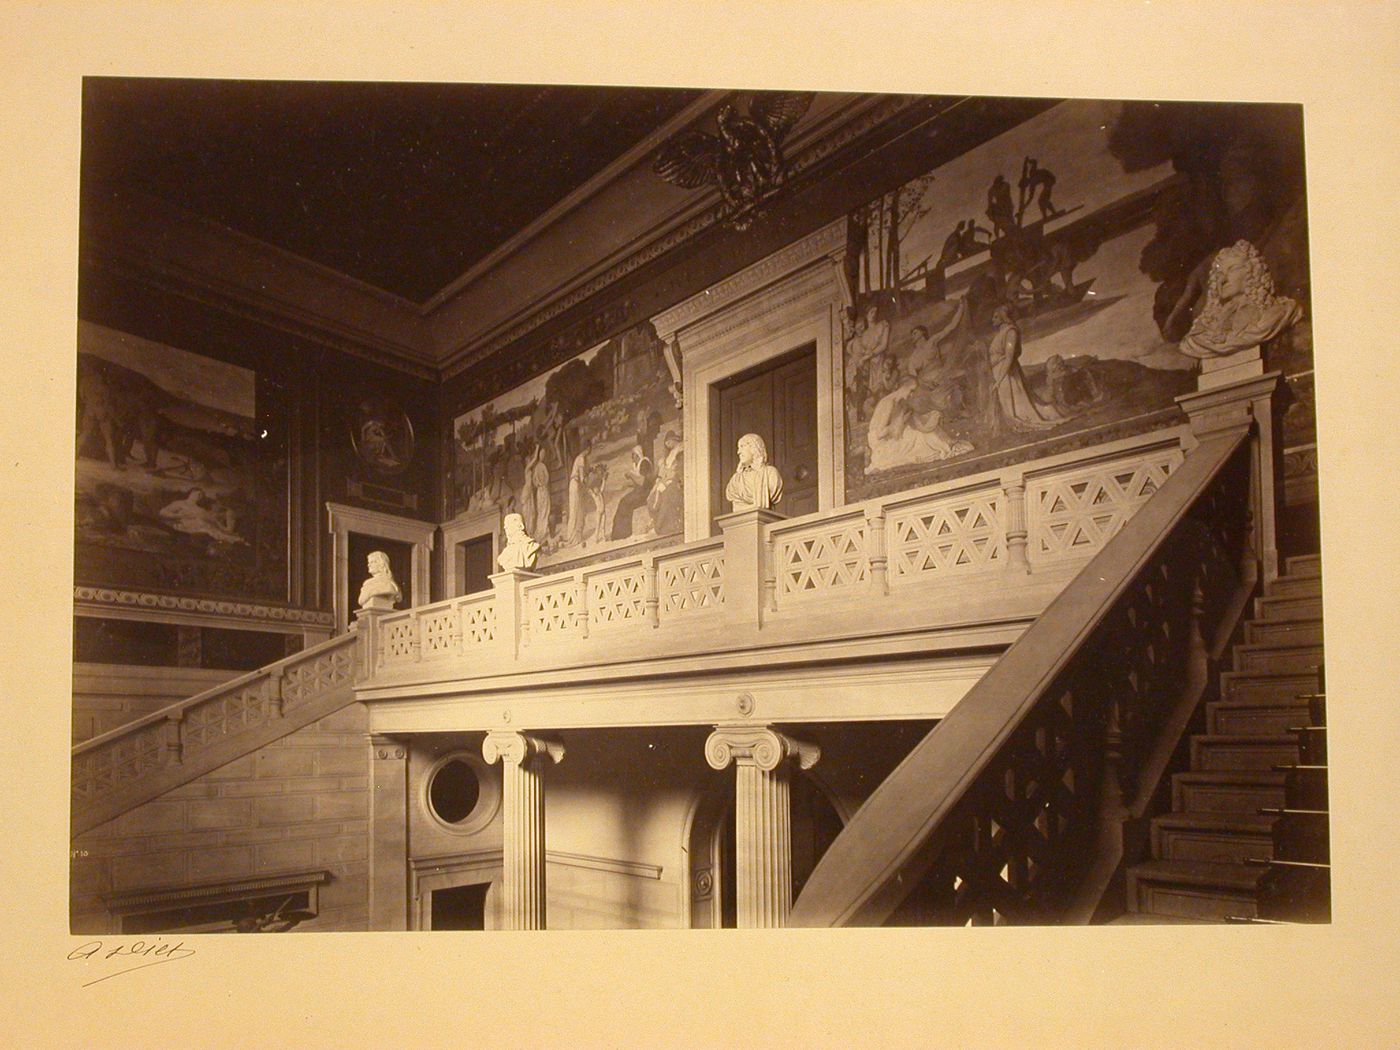 Musée d'Amiens: View of landing and grand staircase, Amiens, France